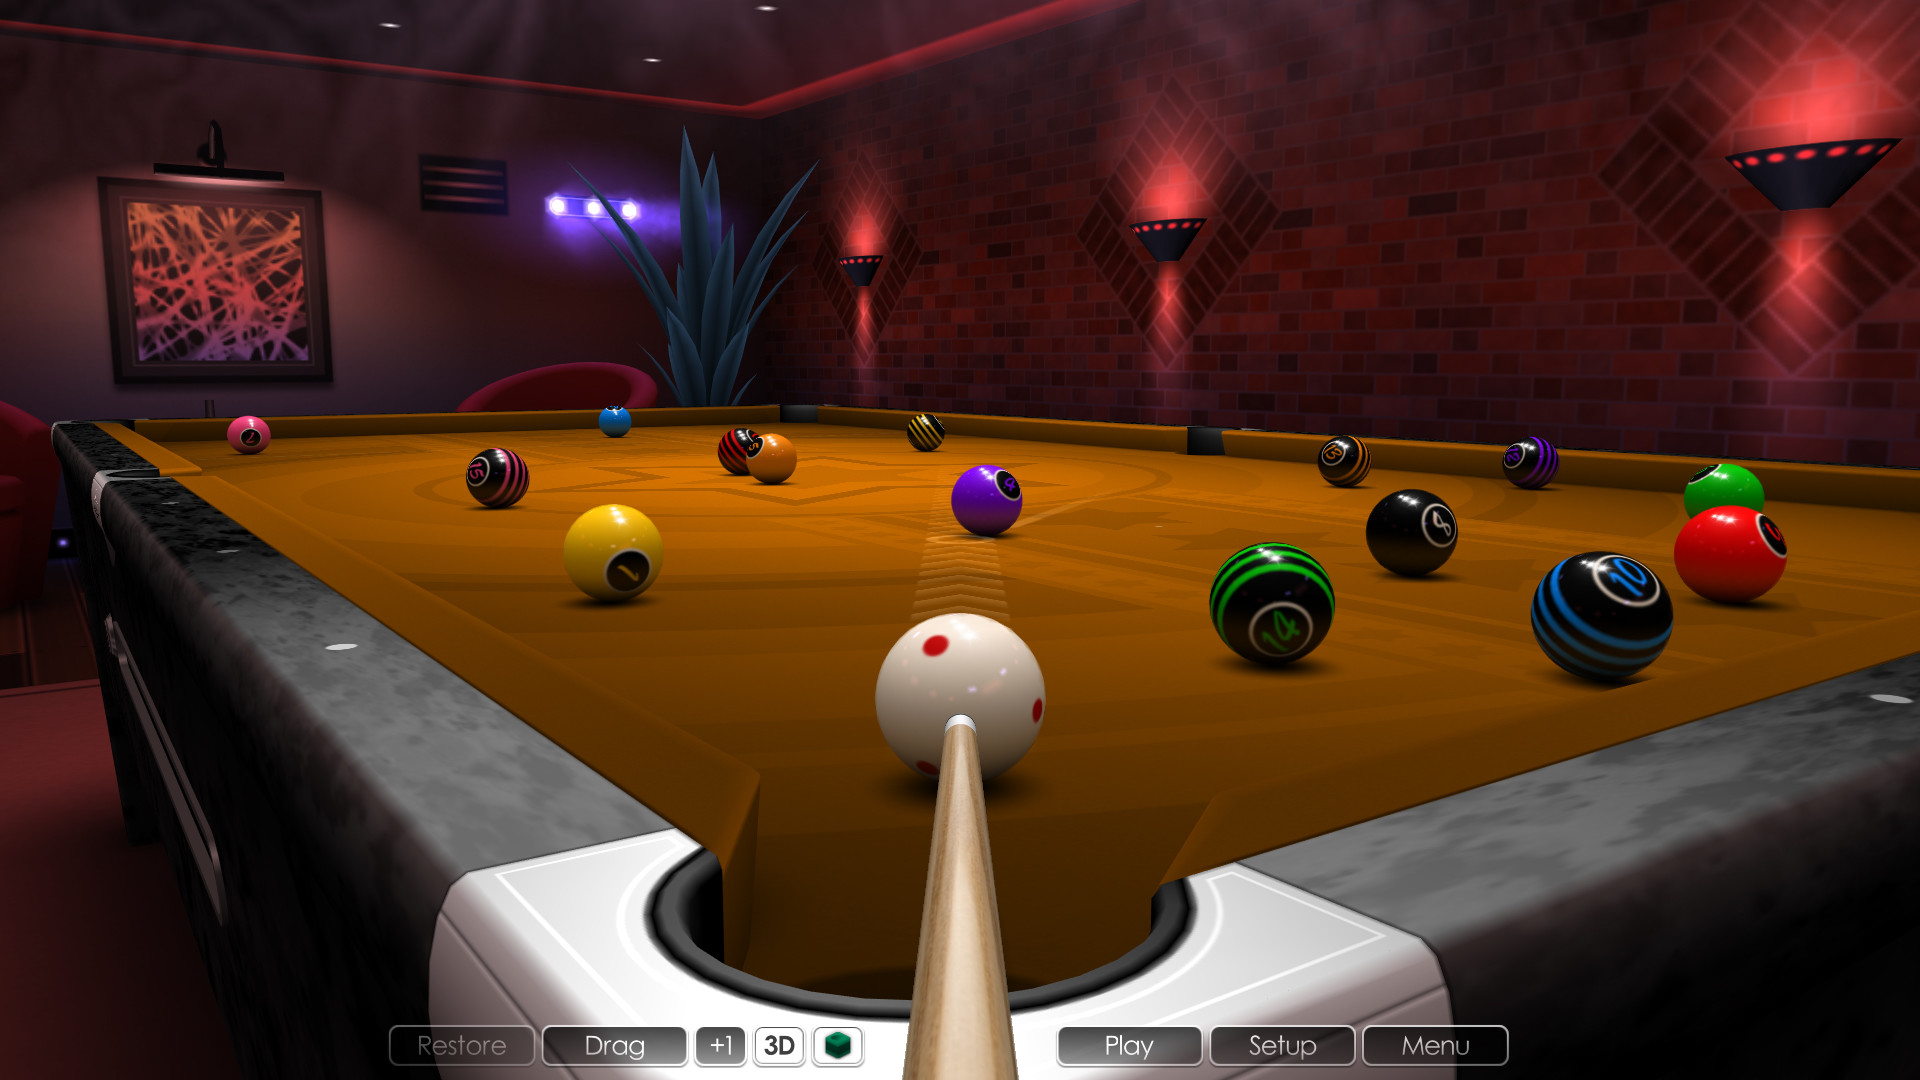 Cue Club 2 - Pool and Snooker Game for PC